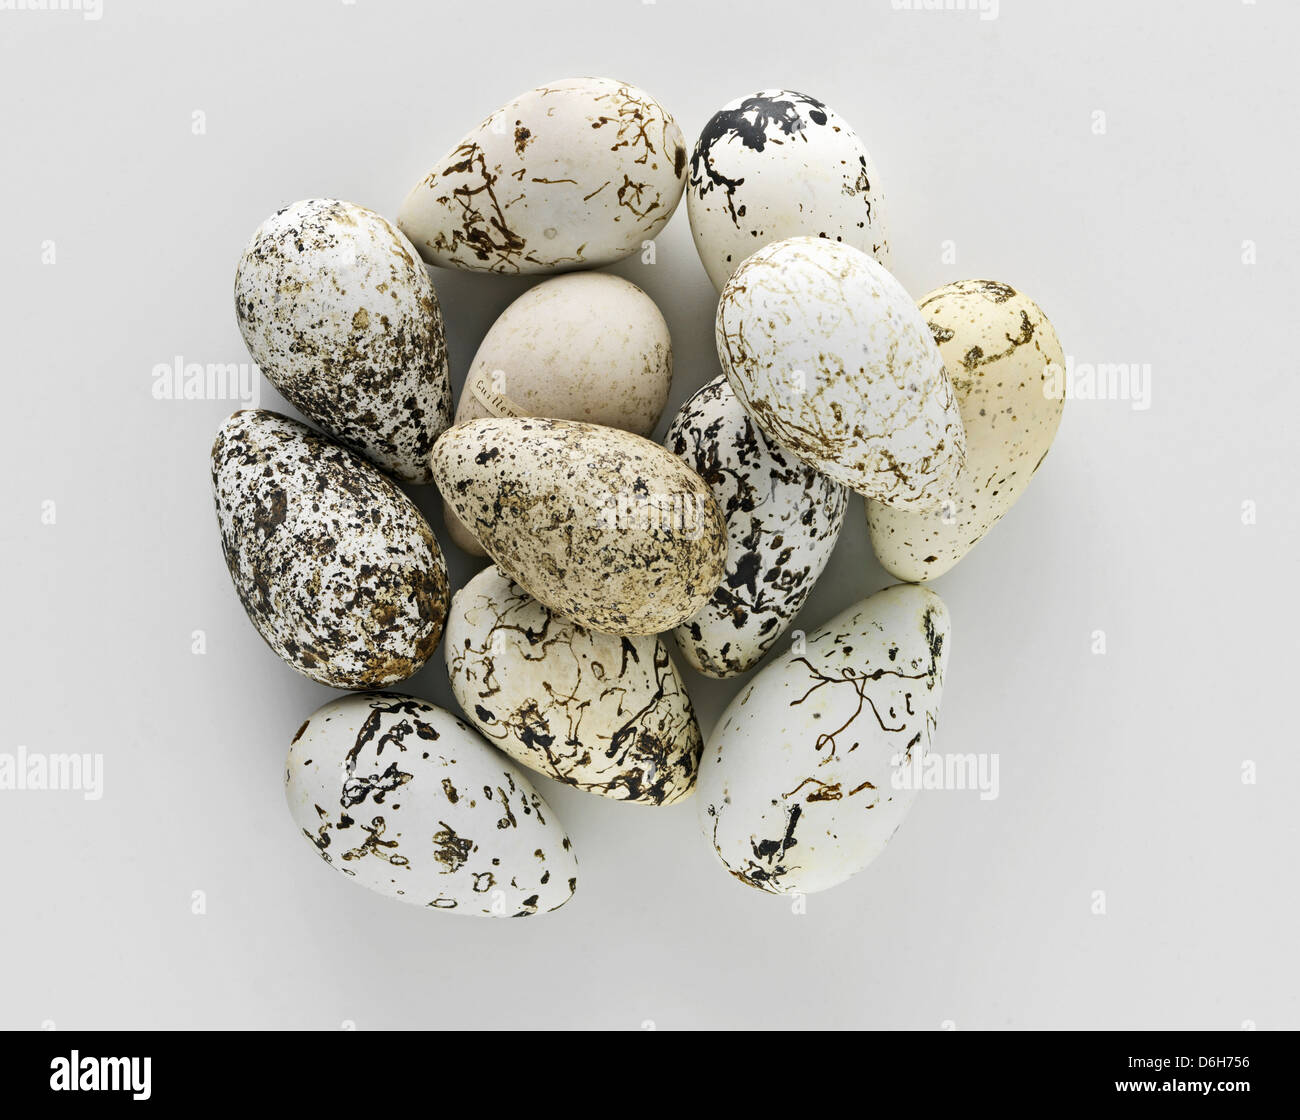 Pile of old speckled eggs Stock Photo